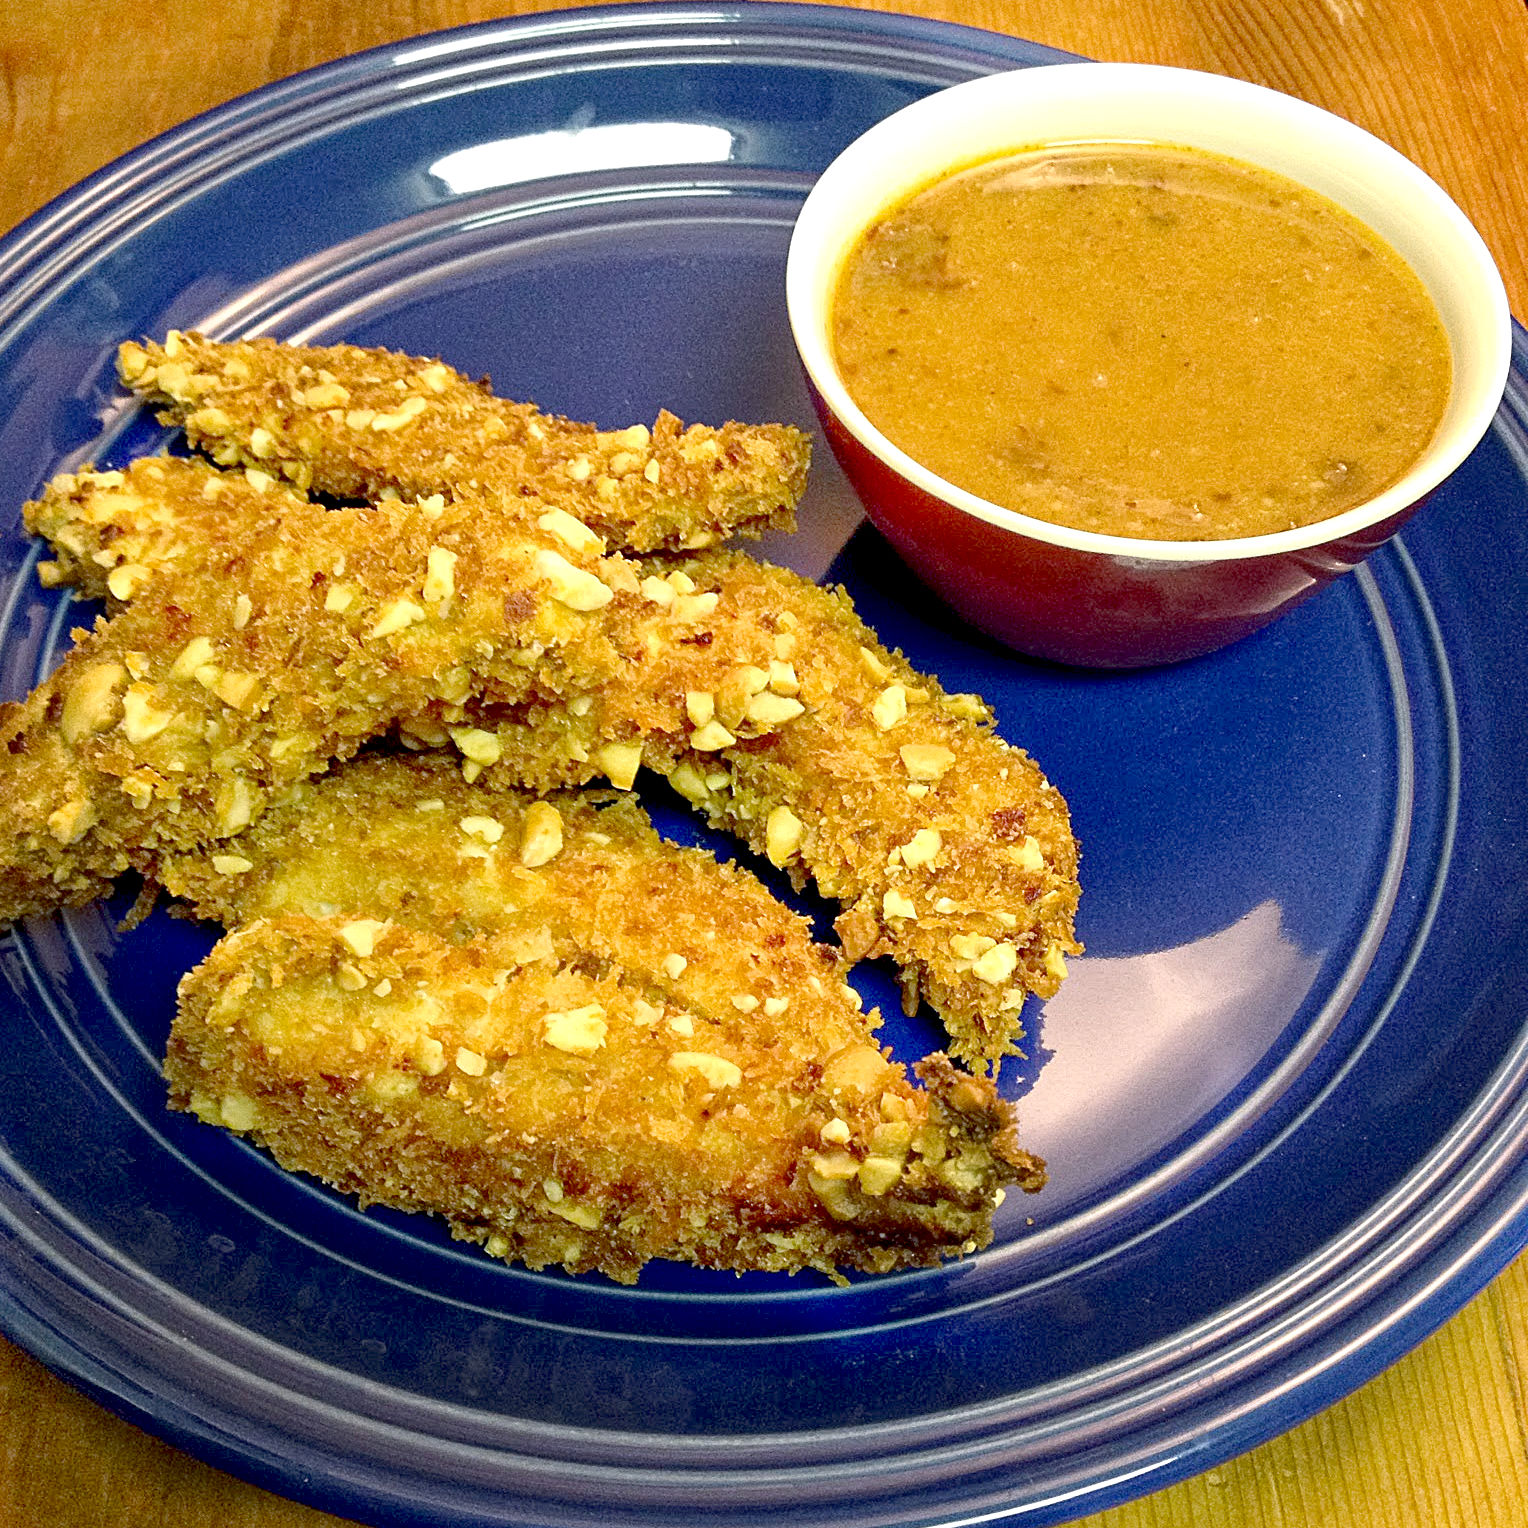 Hands down.  This combination of toasted panko and peanuts is crunchy.  It's very crunchy.  It's crazy tasty crunchy!  Which makes these Crunchy Crusted Chicken Strips with Chipotle Honey Mustard super tasty crazy crunchy.